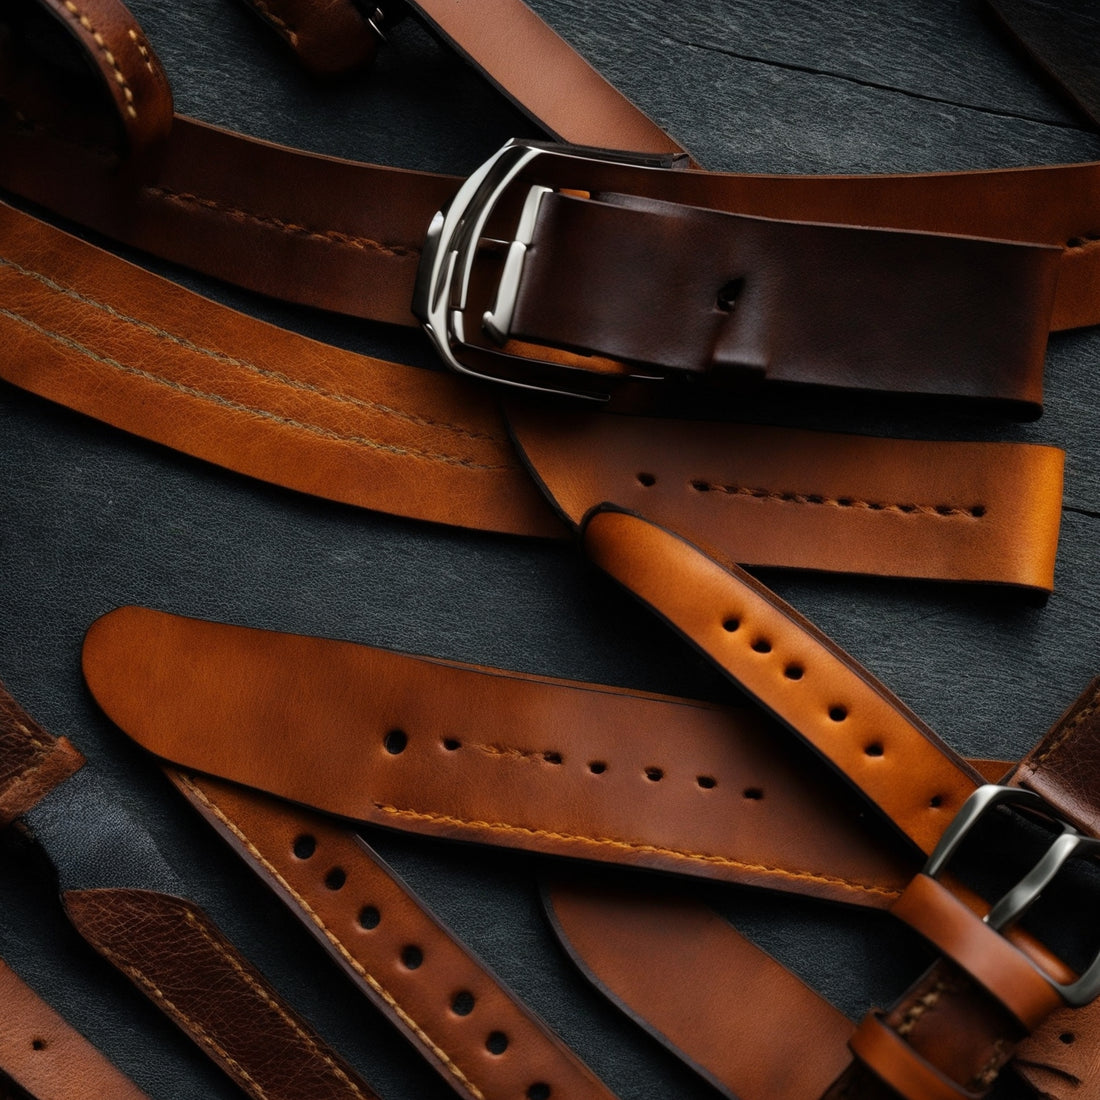 The Ultimate Accessory: Crocodile Leather Handmade Watch Bands